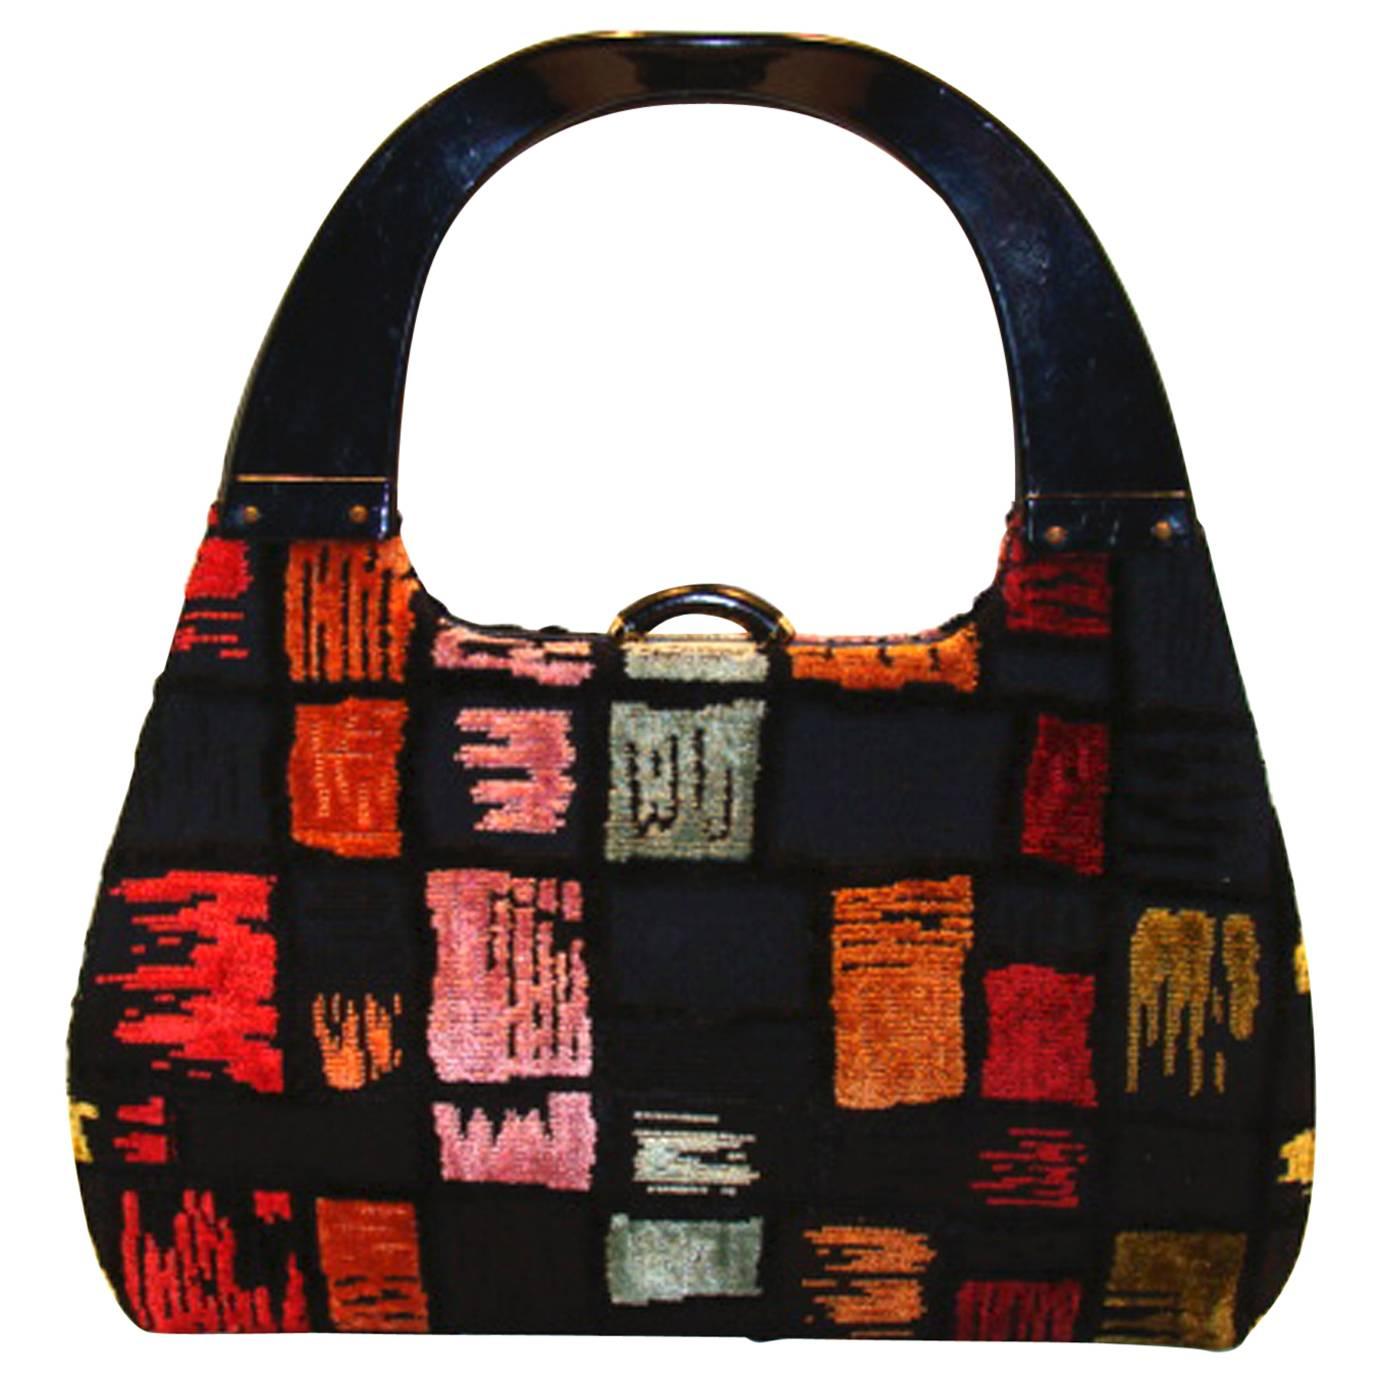 Rare and Colorful Architectural Handbag with Lucite Handles For Sale